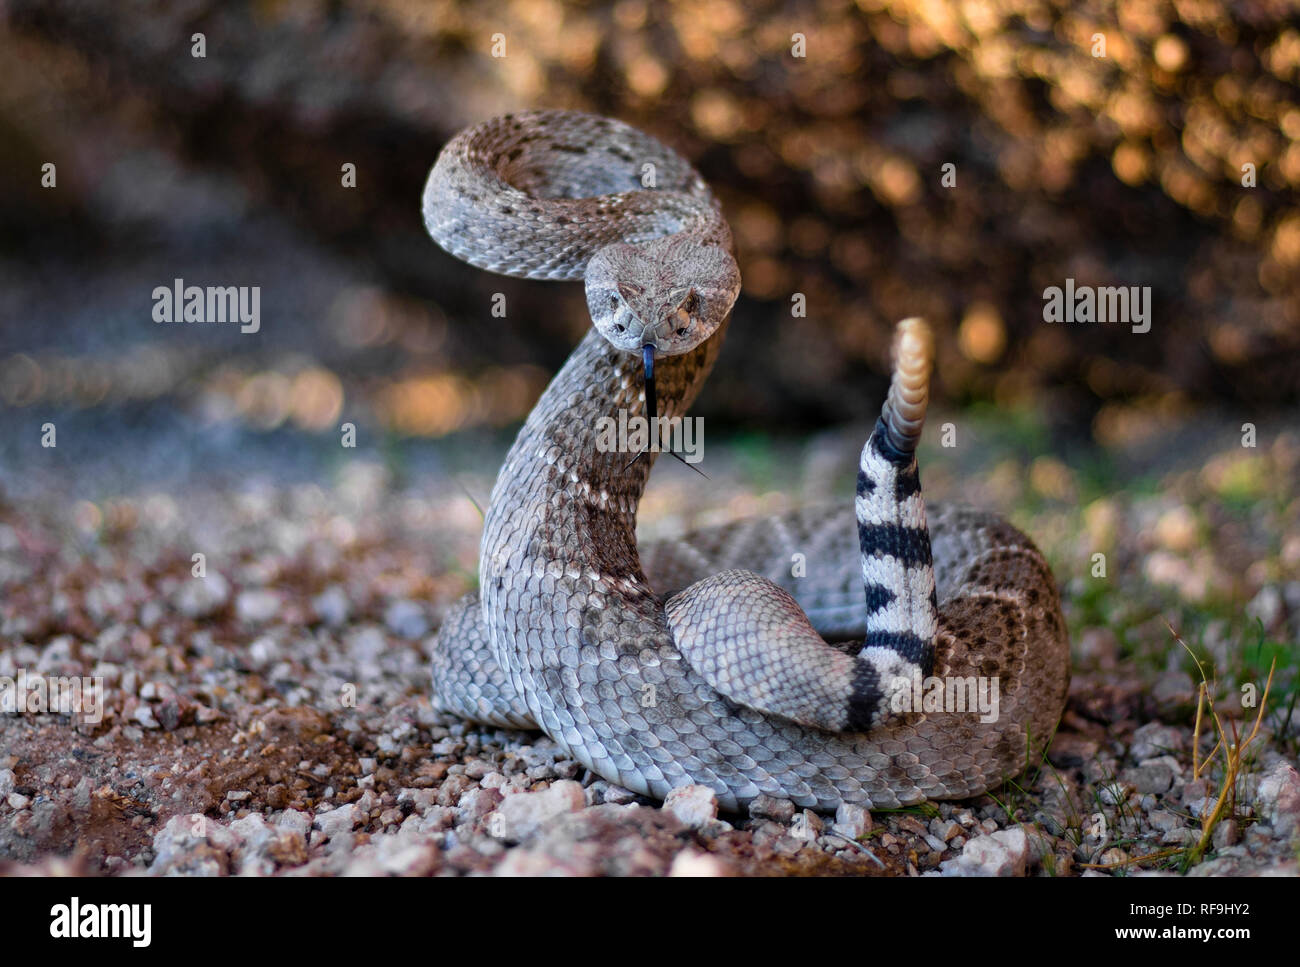 Aggressive Rattlesnake in Arizona poses as it rears backs and shows that it is dangerous. This defensive behavior helps ward of potential predators. Stock Photo